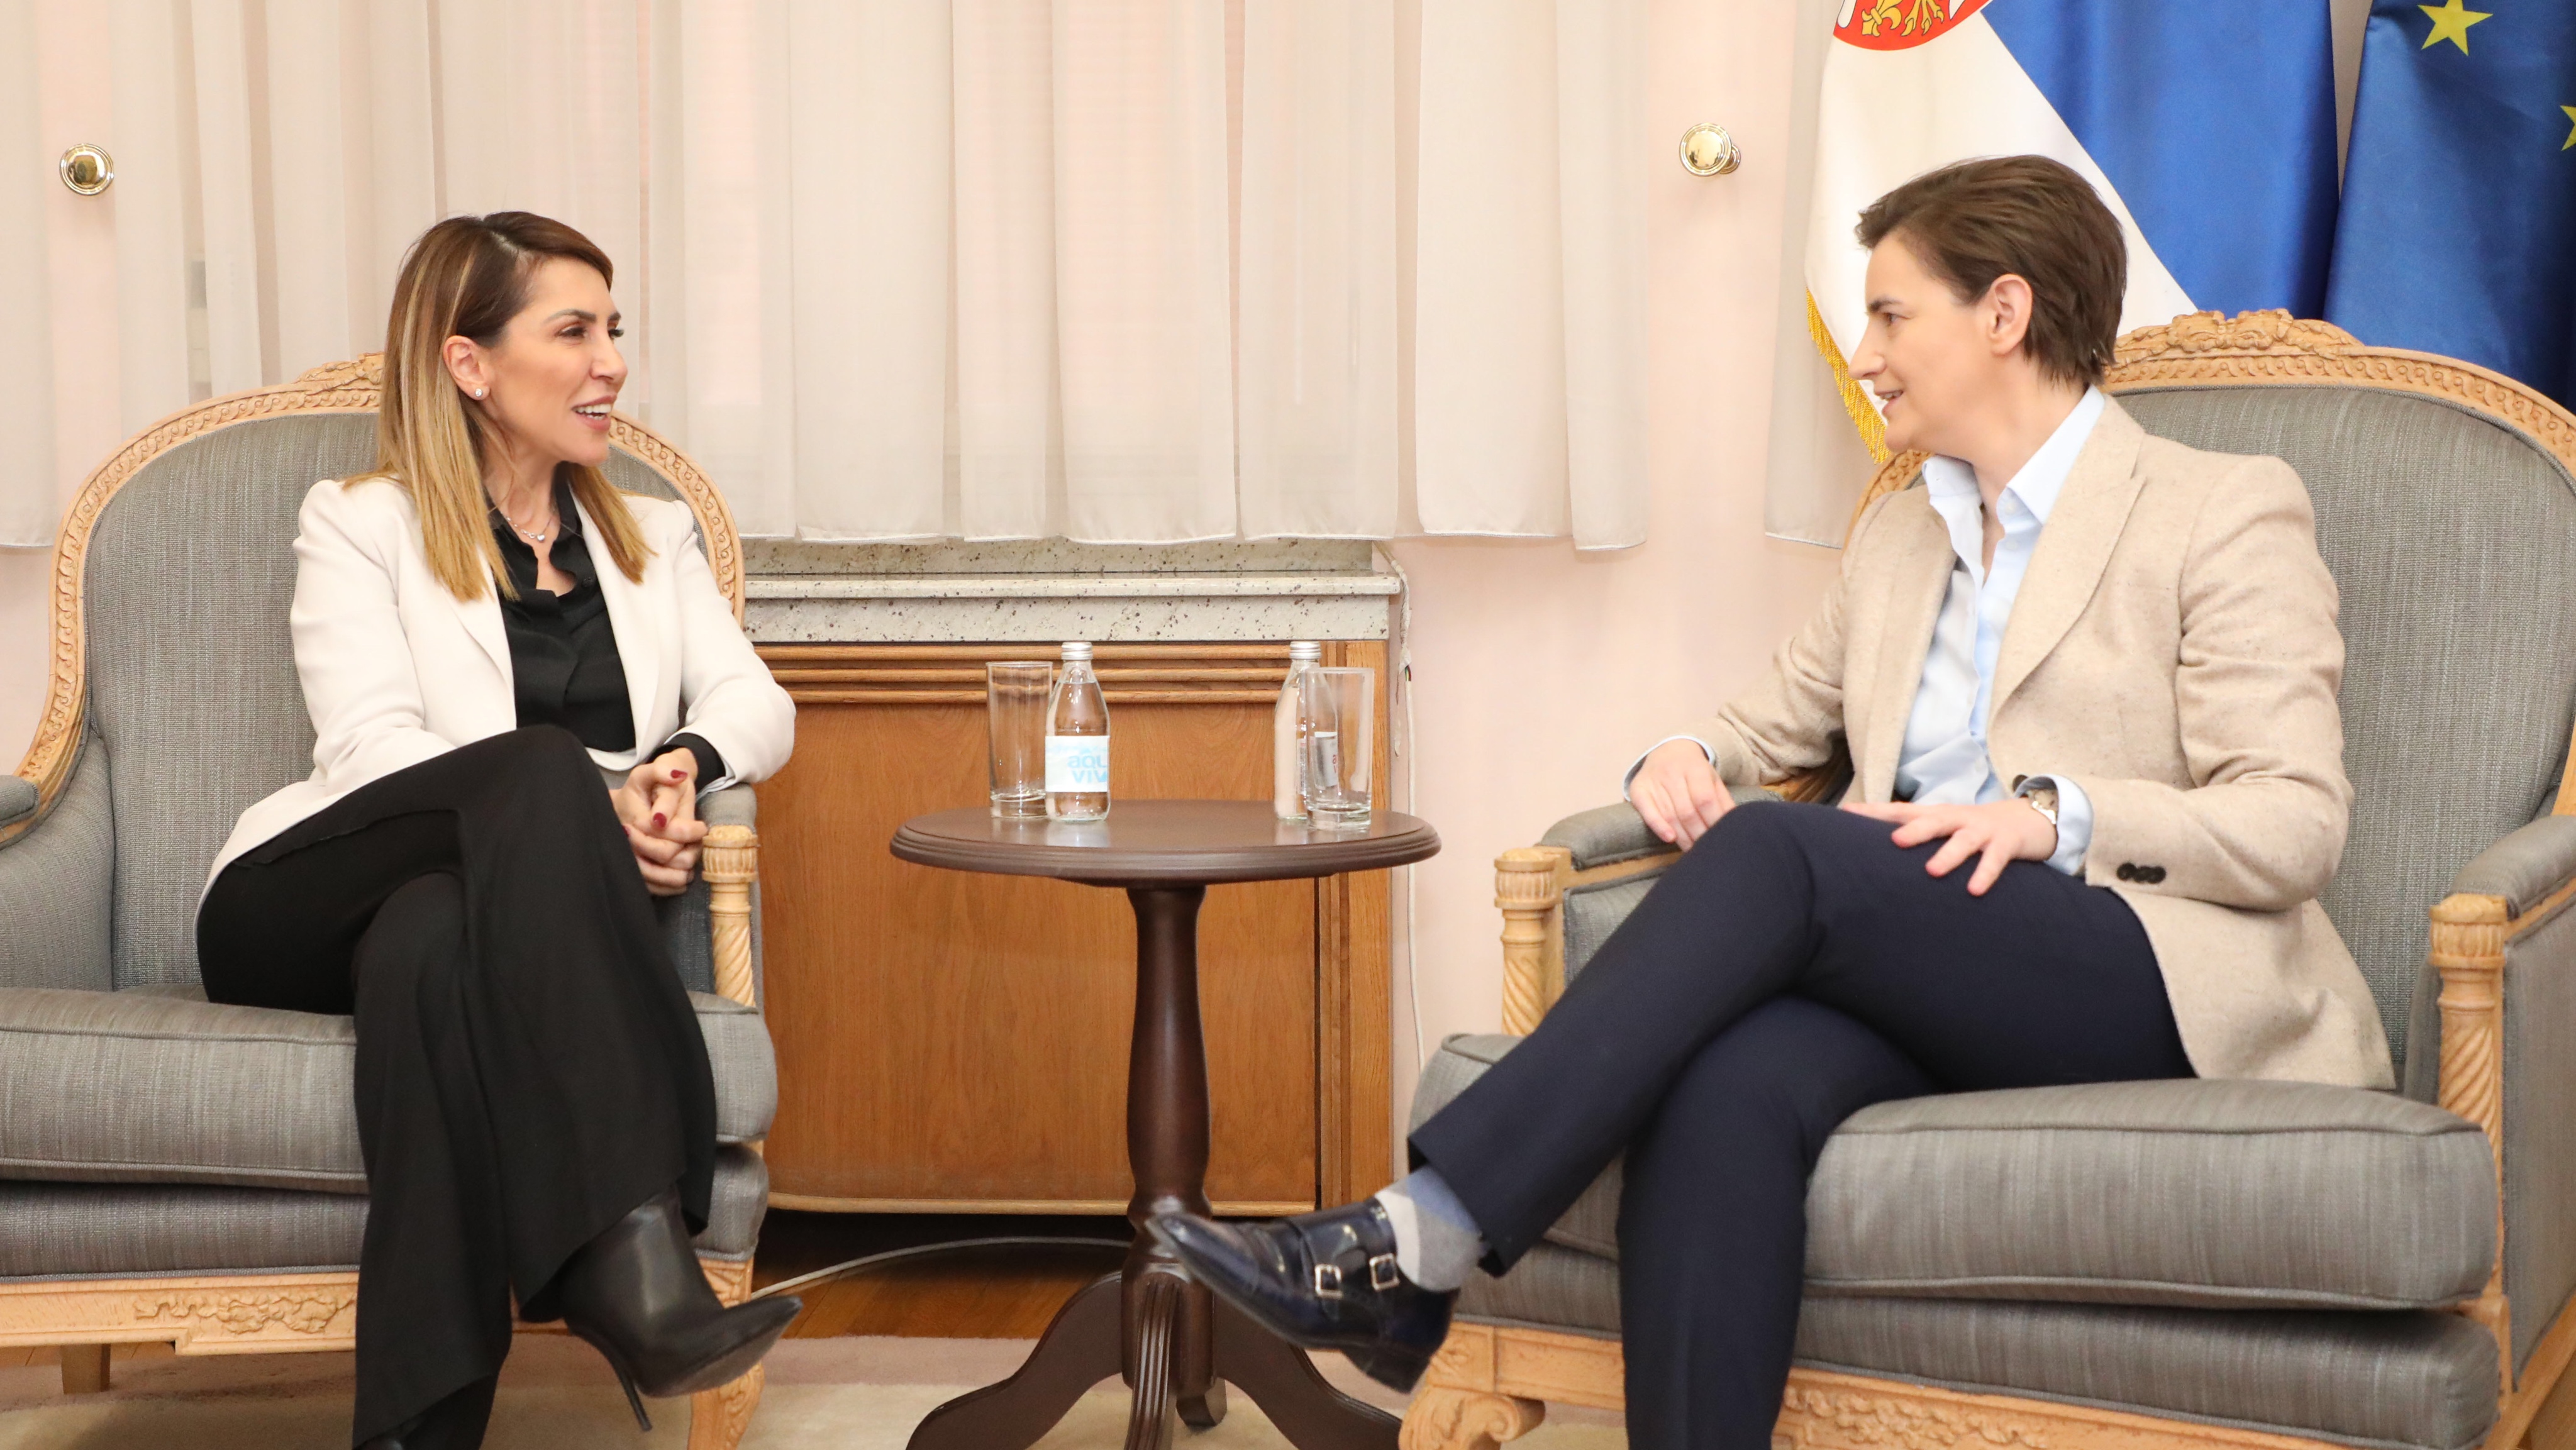 In a two-day visit to Serbia, Secretary General of the Regional Cooperation Council (RCC) Majlinda Bregu met with the Prime Minister of Serbia, Ana Brnabić and First Deputy Prime Minister and Minister of Foreign Affairs, Ivica Dačić, , among other Serbian officials. (Photo:  Courtesy of the Government of the Republic of Serbia)